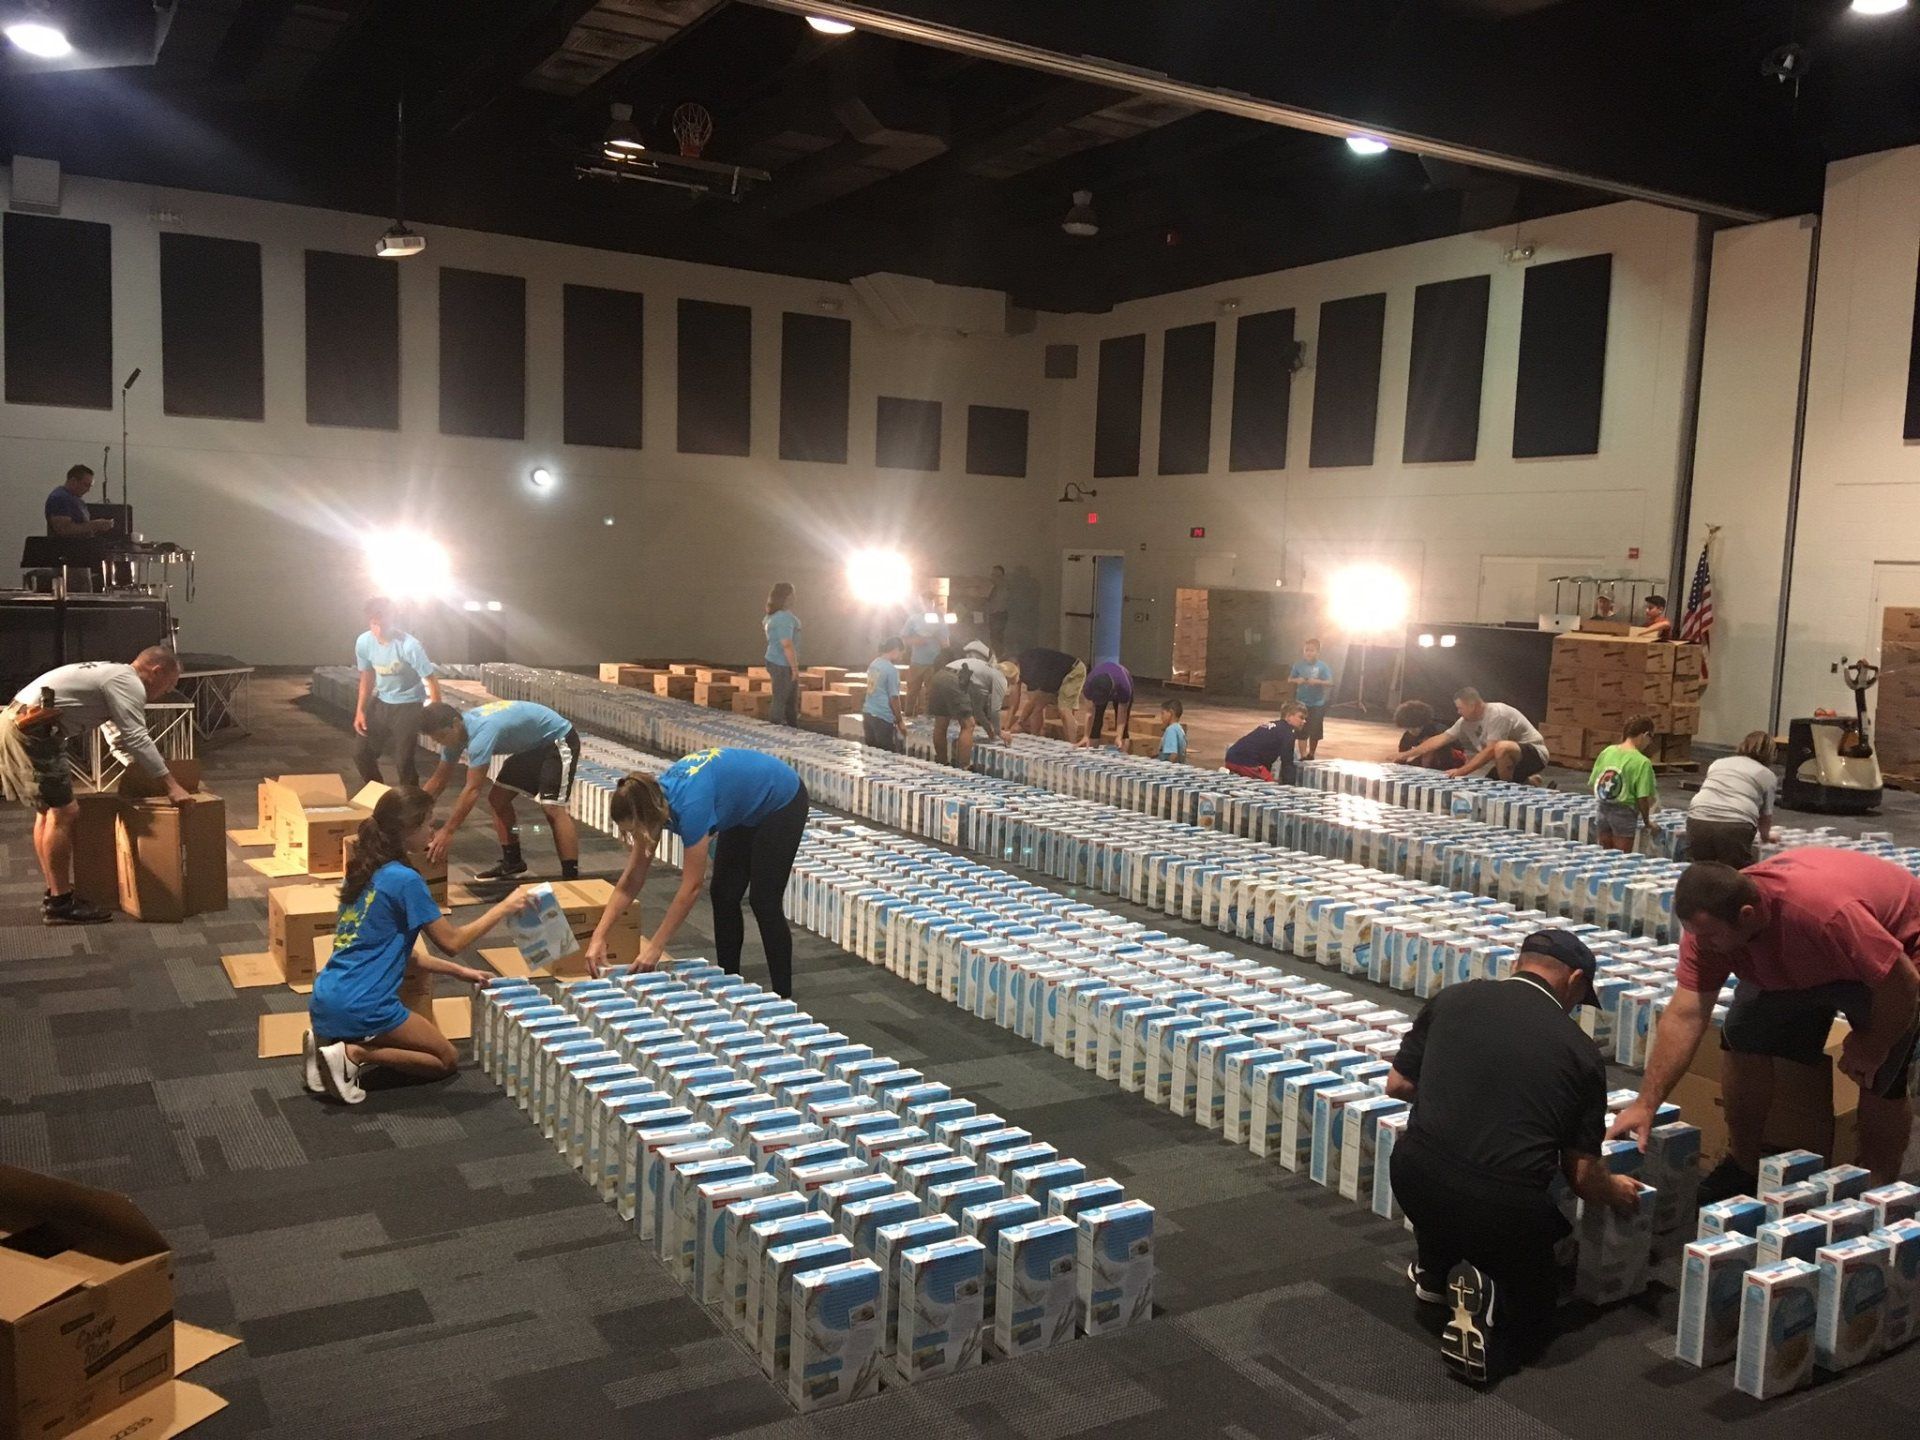 Most cereal boxes toppled in a domino fashion world record: Meals of Hope